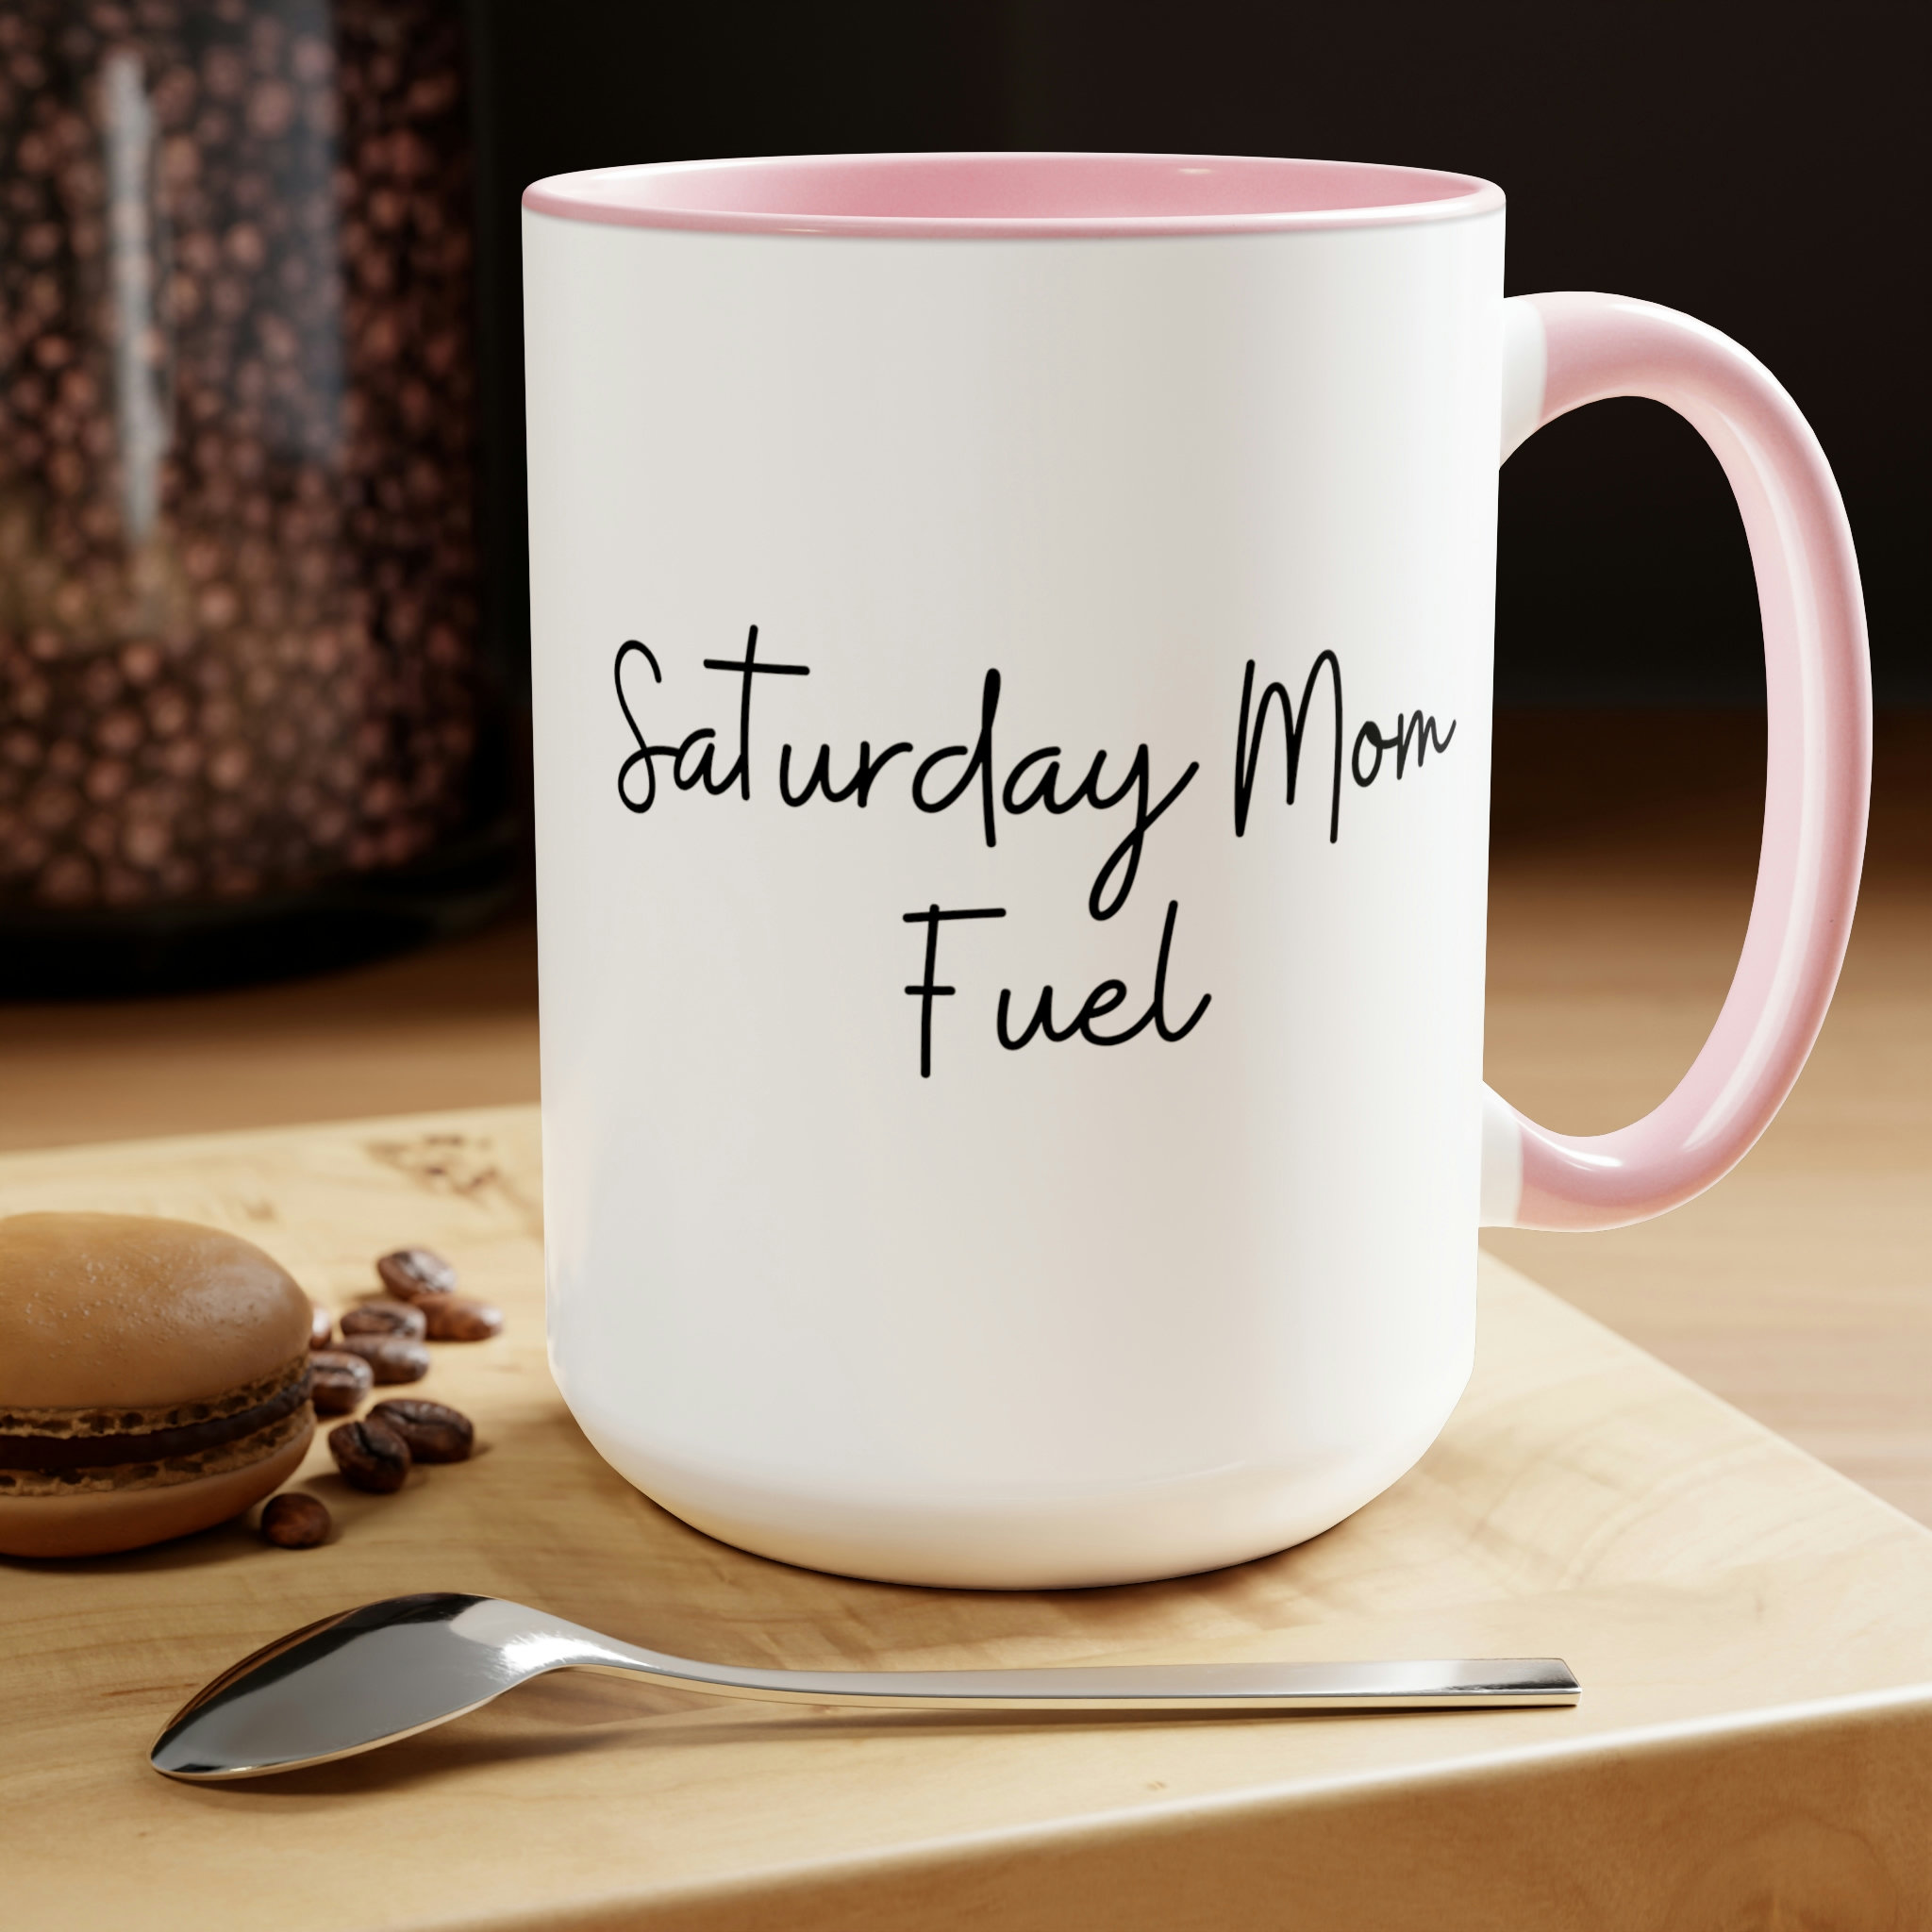 15 Clever & Funny Mugs for Mom that Make Every Morning More Fun